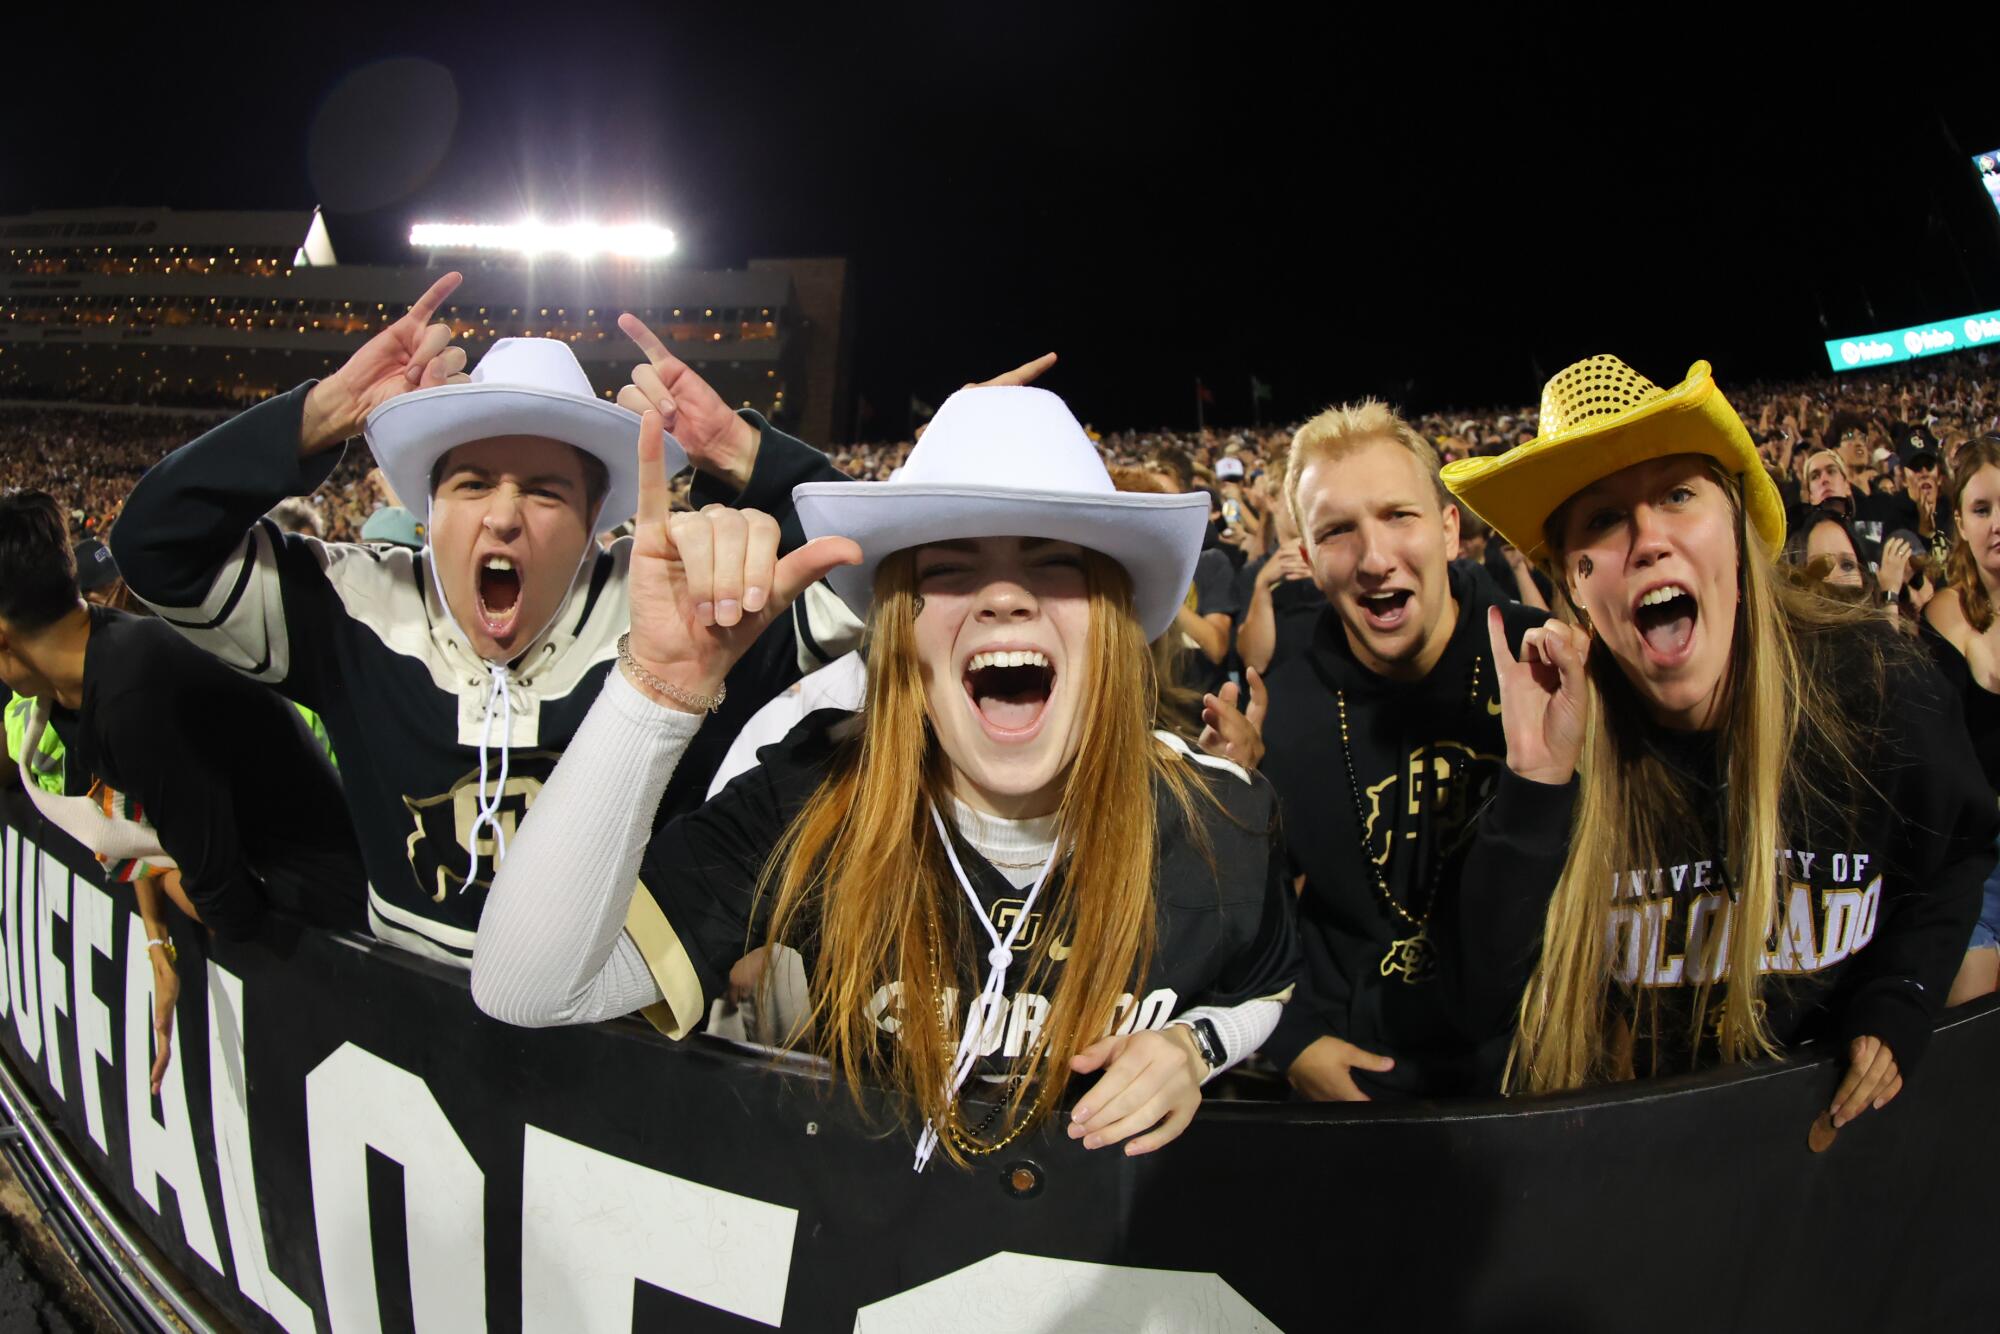 Colorado fans wearing rancher hats cheer during the team's game against Colorado State